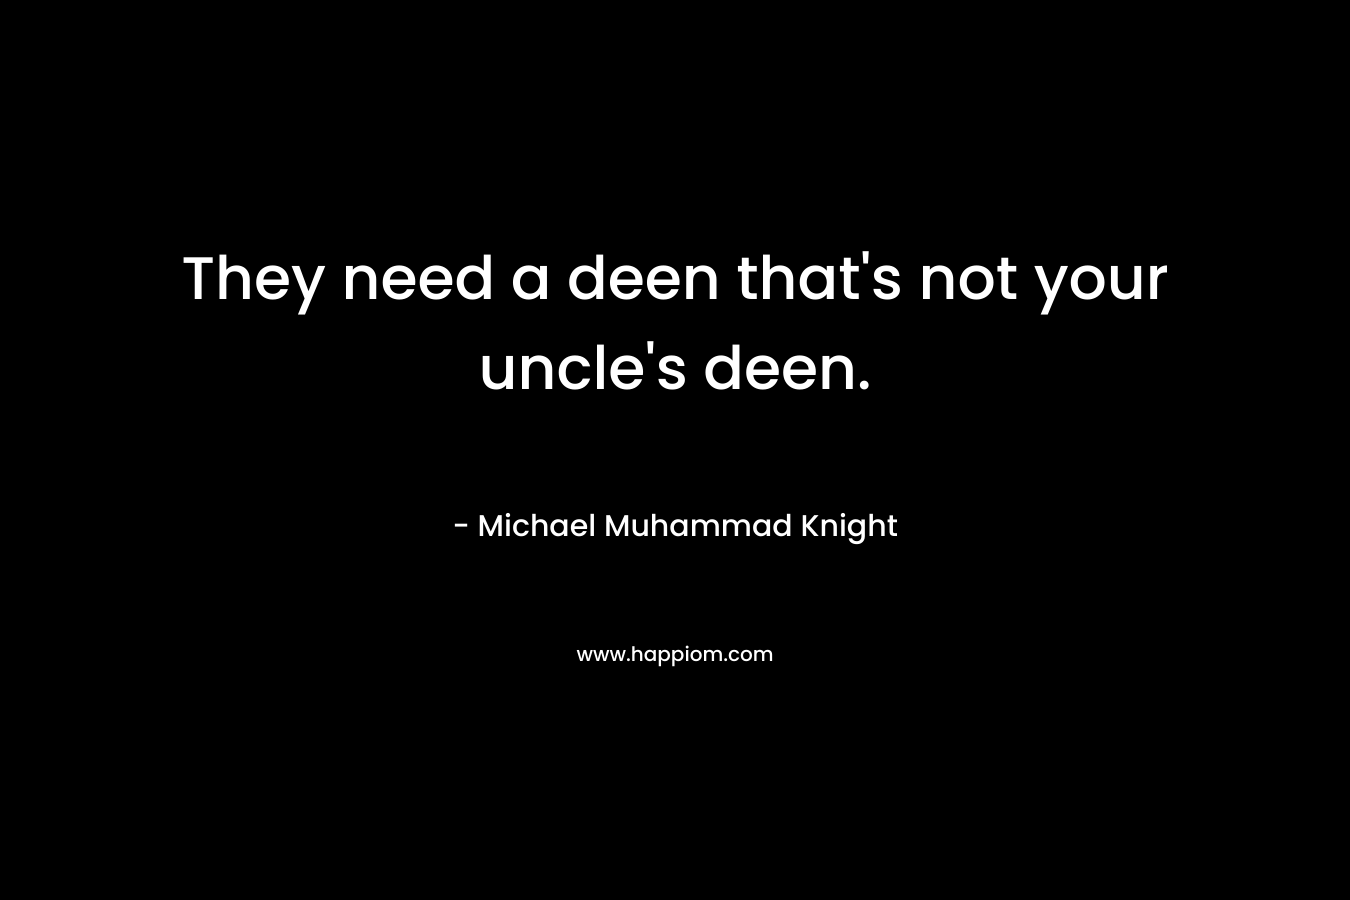 They need a deen that’s not your uncle’s deen. – Michael Muhammad Knight